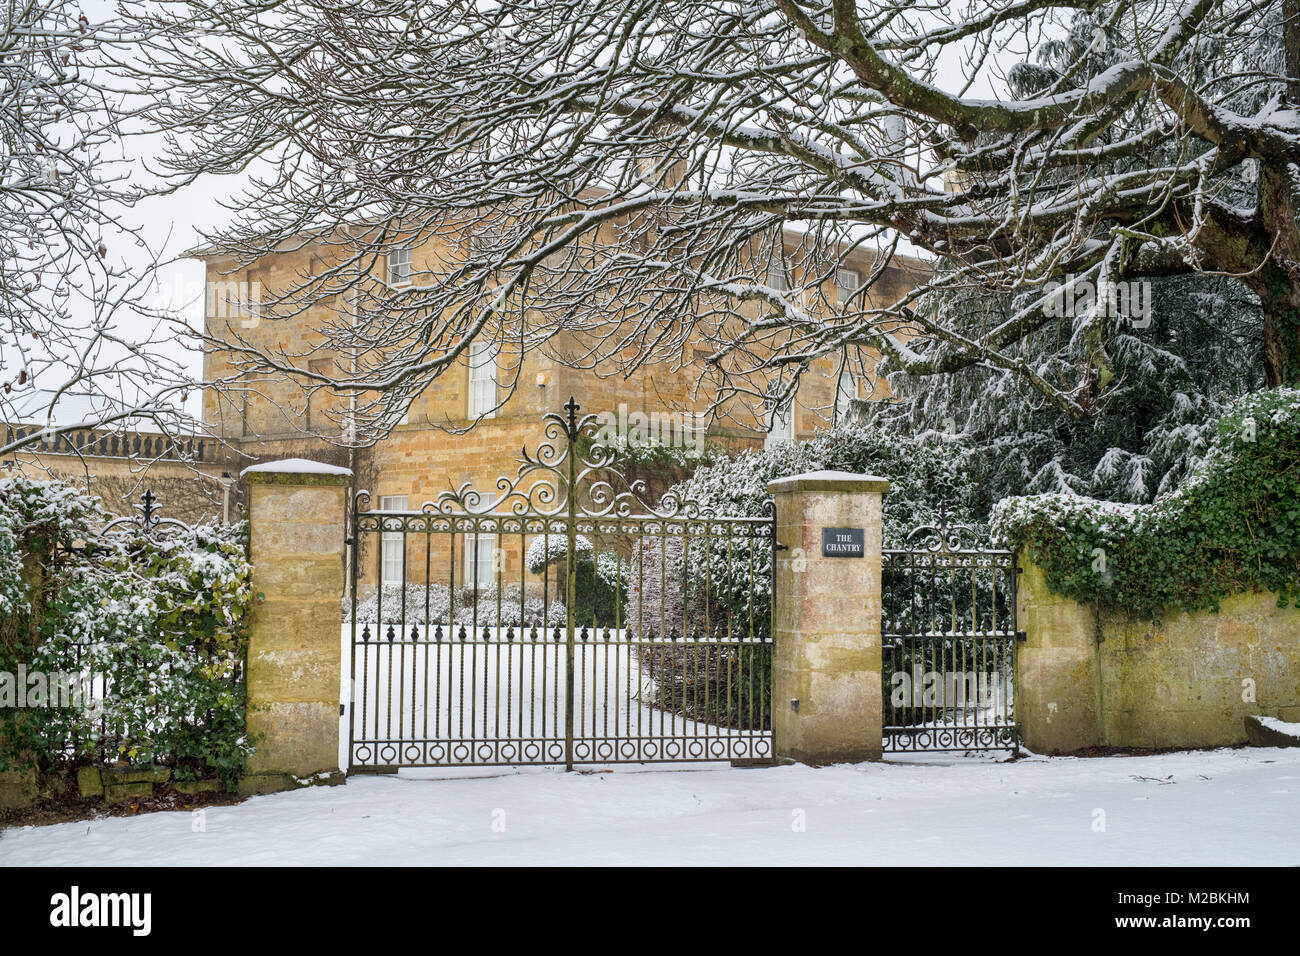 The chantry house in the snow in January. Bourton on the Hill, Cotswolds, Gloucestershire, England. Stock Photo